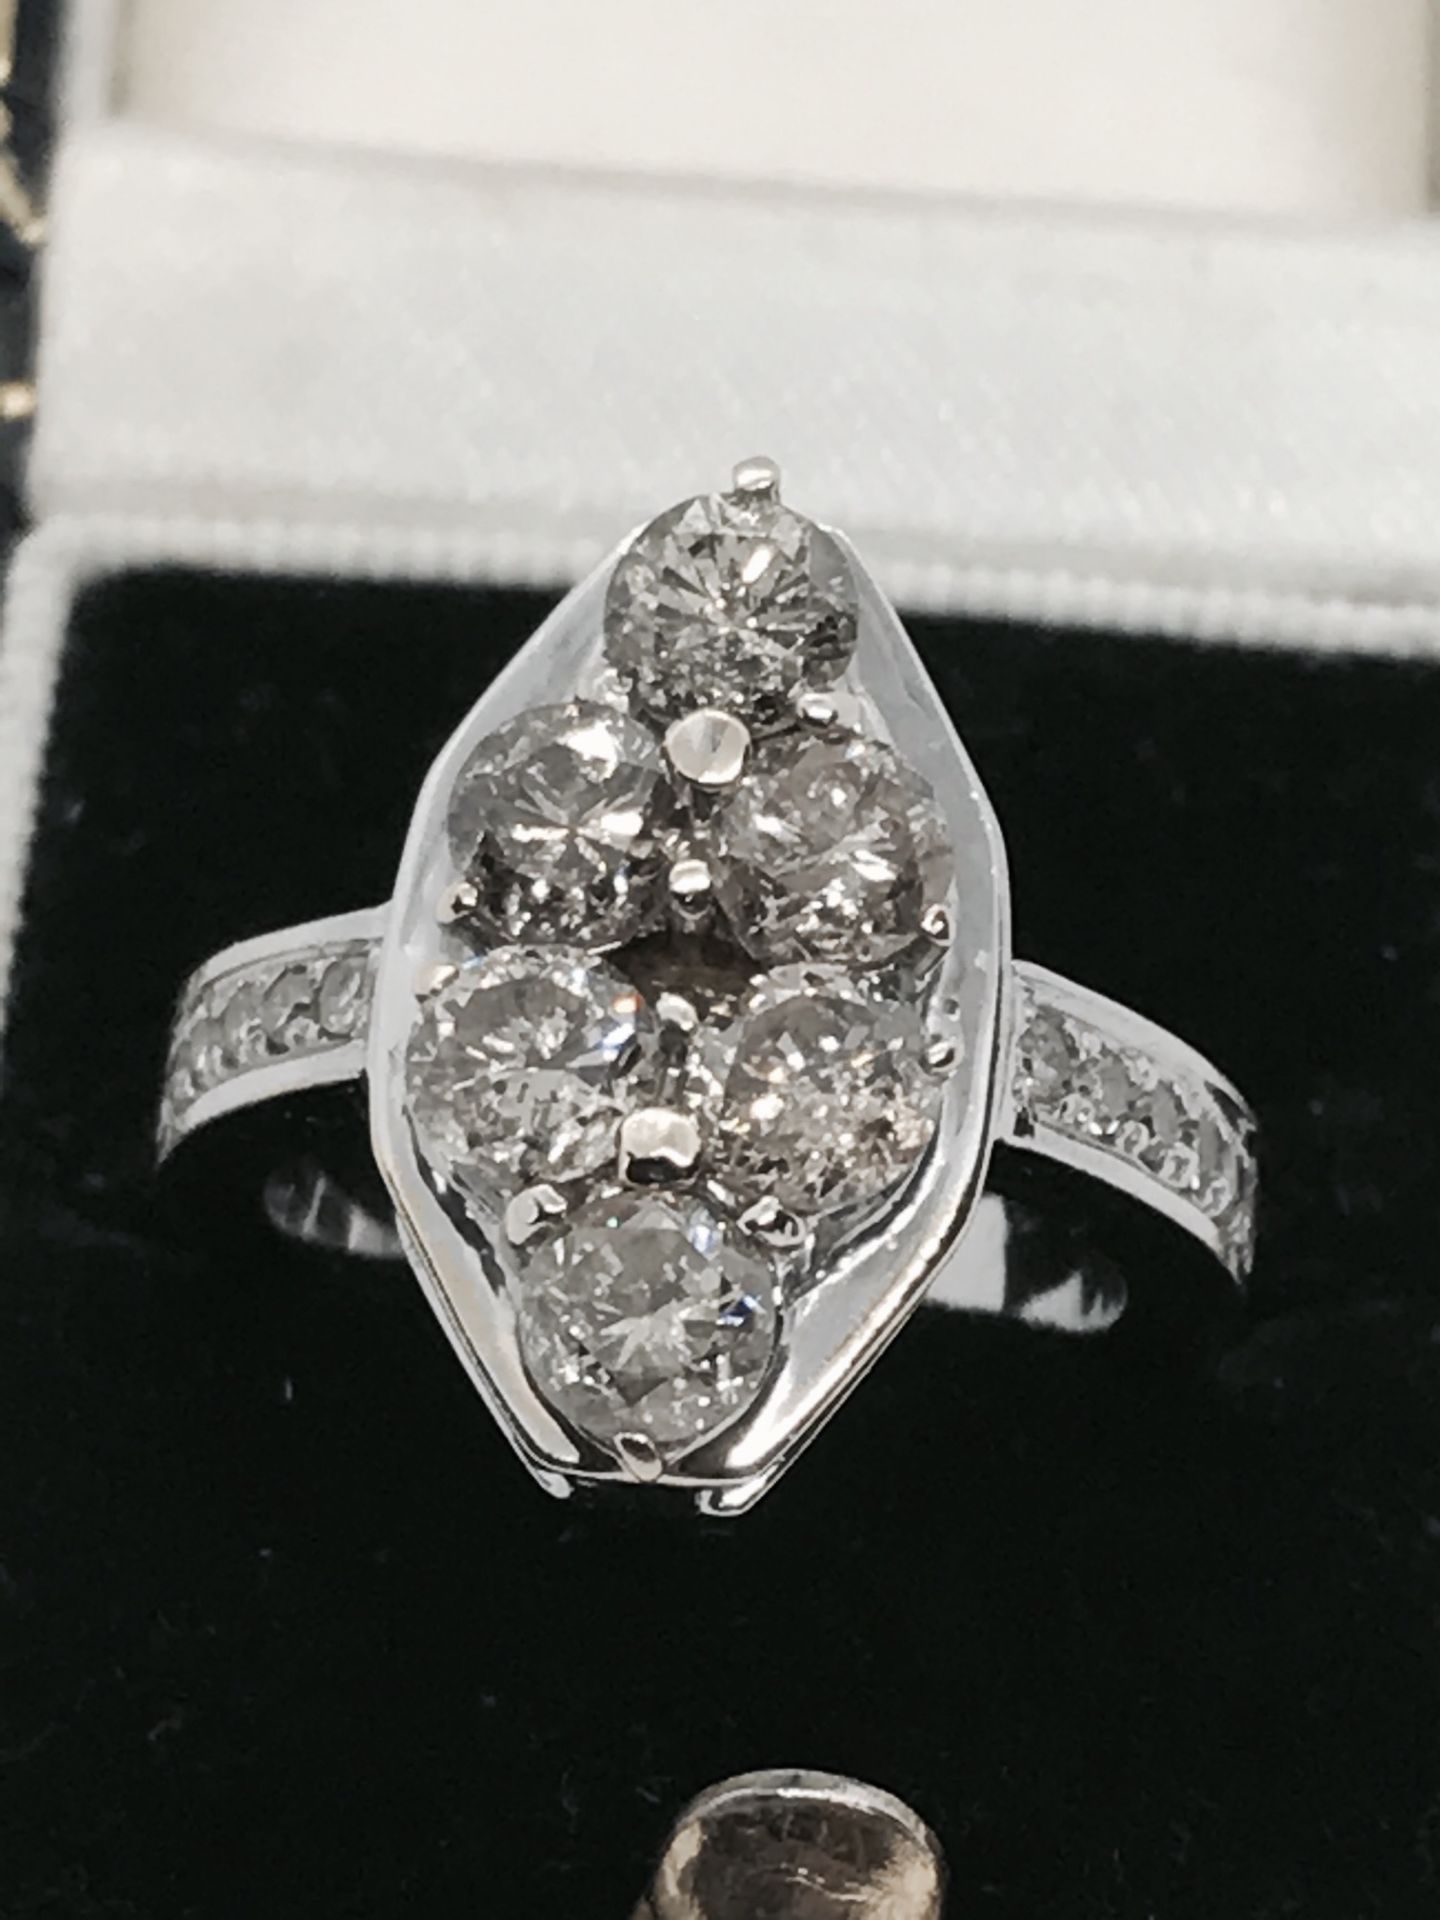 FINE 3.50ct DIAMOND RING SET IN WHITE METAL (TESTED AS 18ct WHITE GOLD) - Image 3 of 3